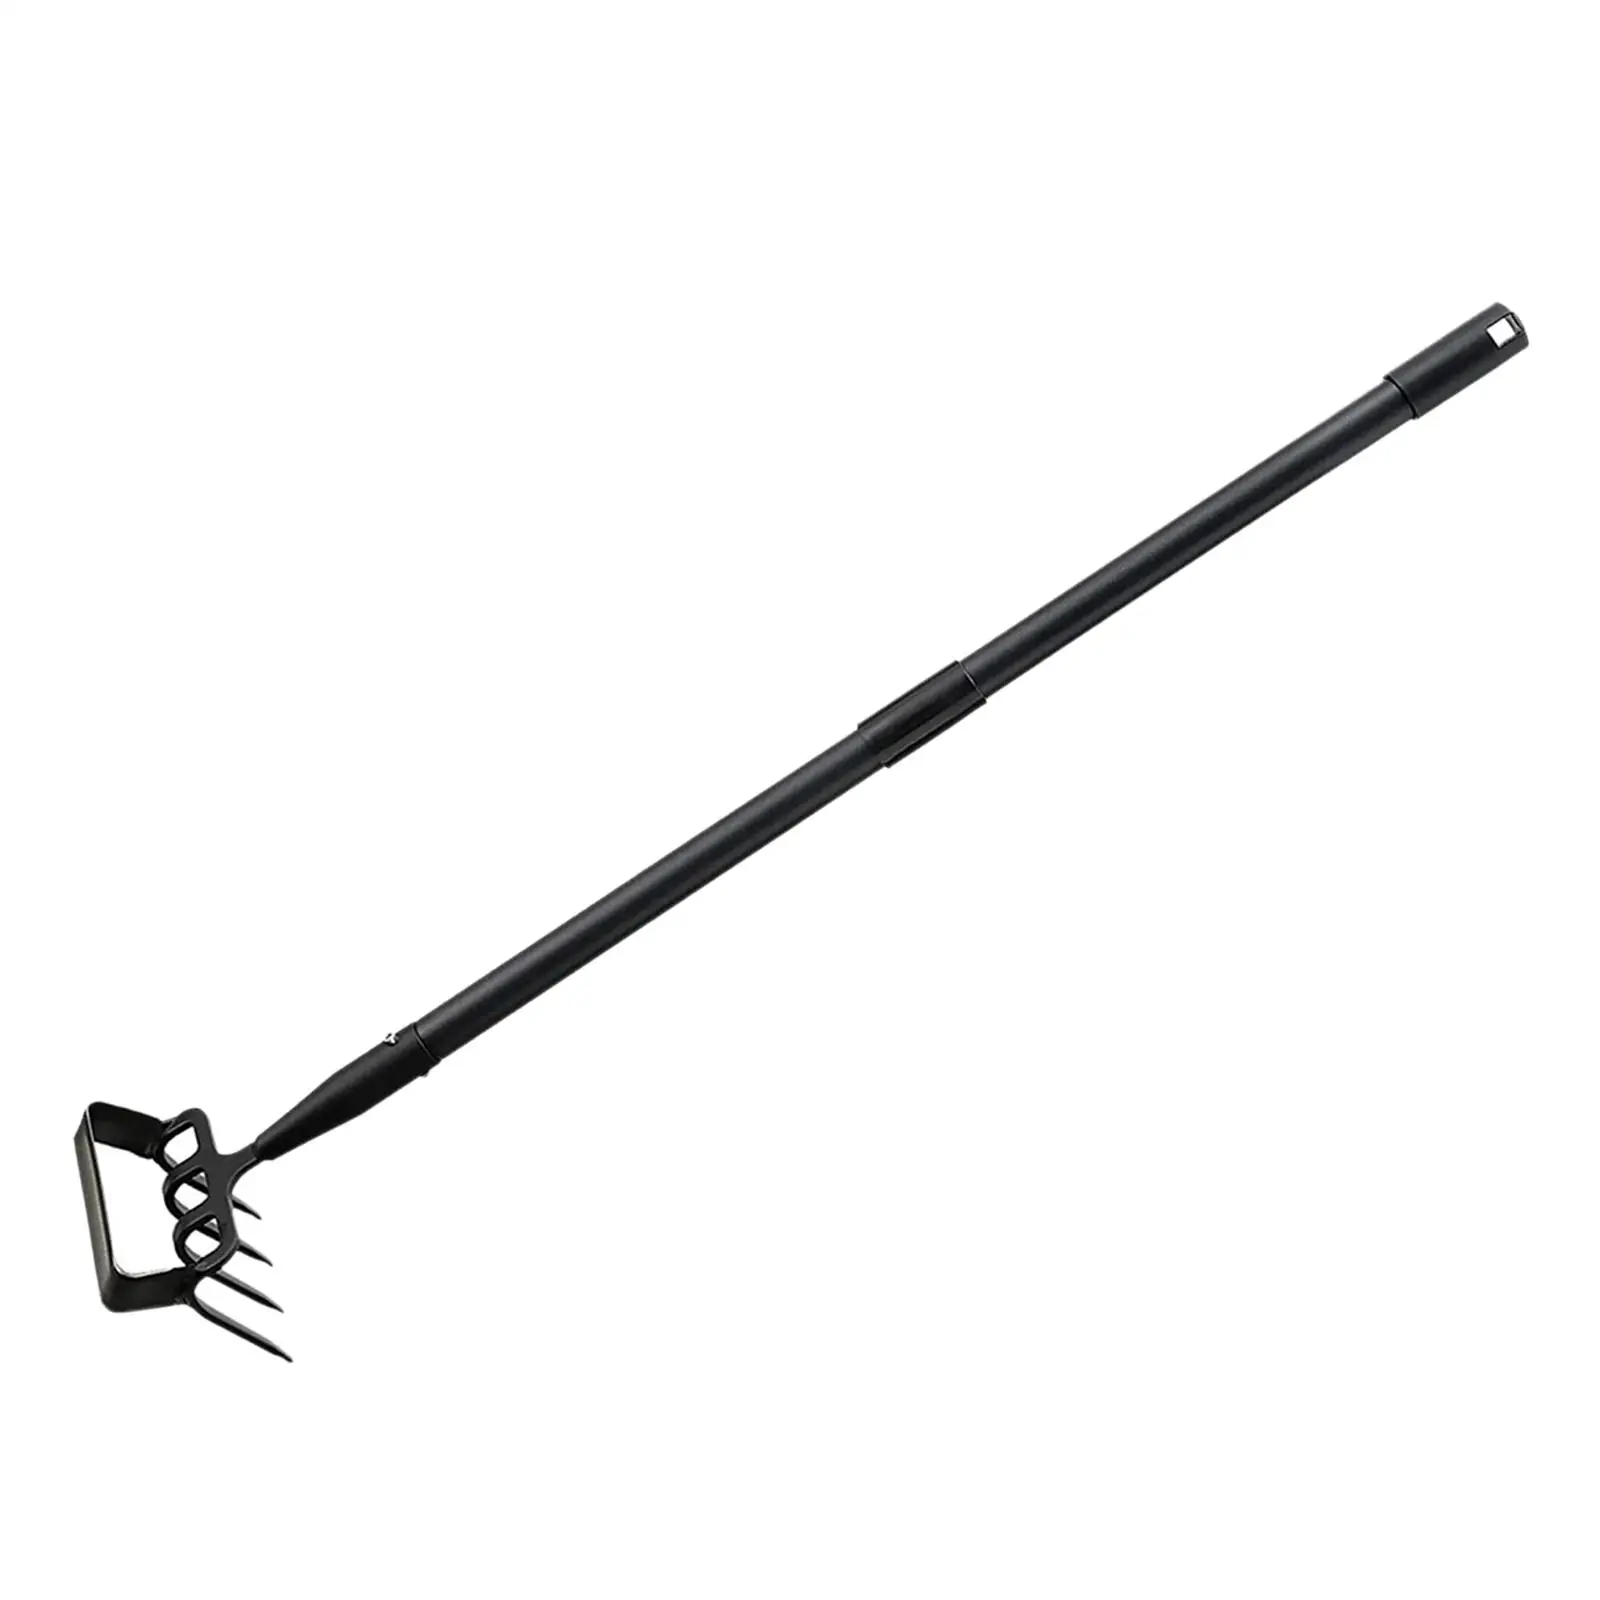 Garden Weeding Tool Weeding Artifact with Long Handle Portable Stirrup Hoe and Cultivator for Weeding Plowing Planting Lawn